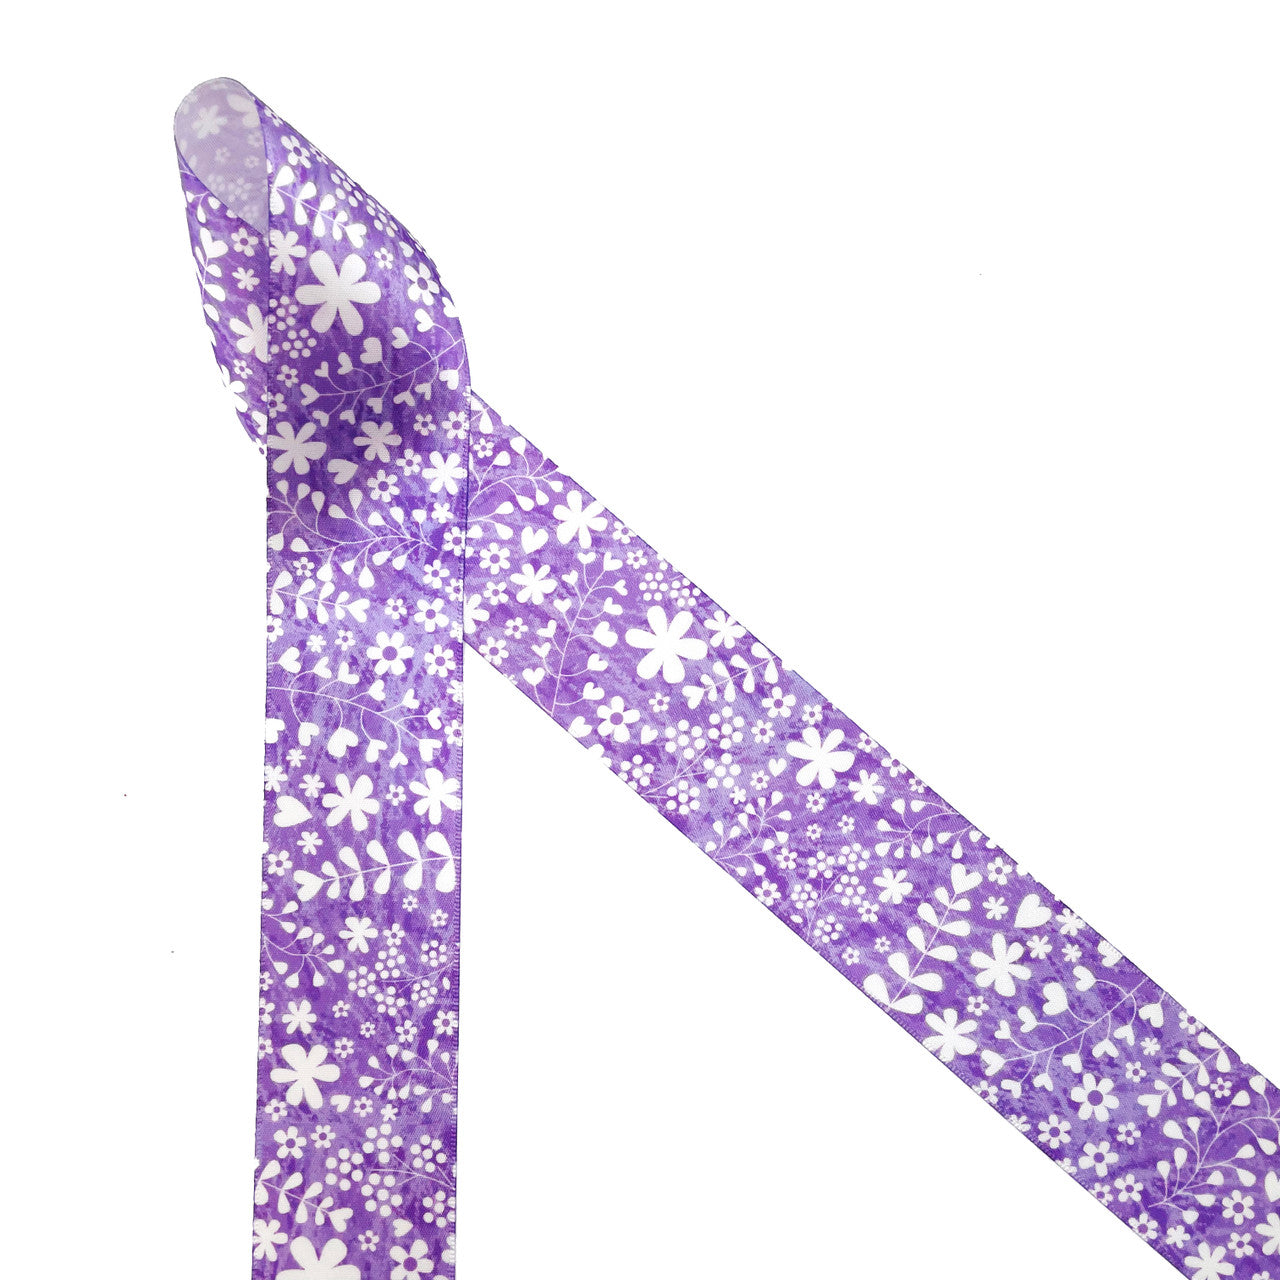 Spring floral print in white stencil on a lavender background printed on 1.5" white satin